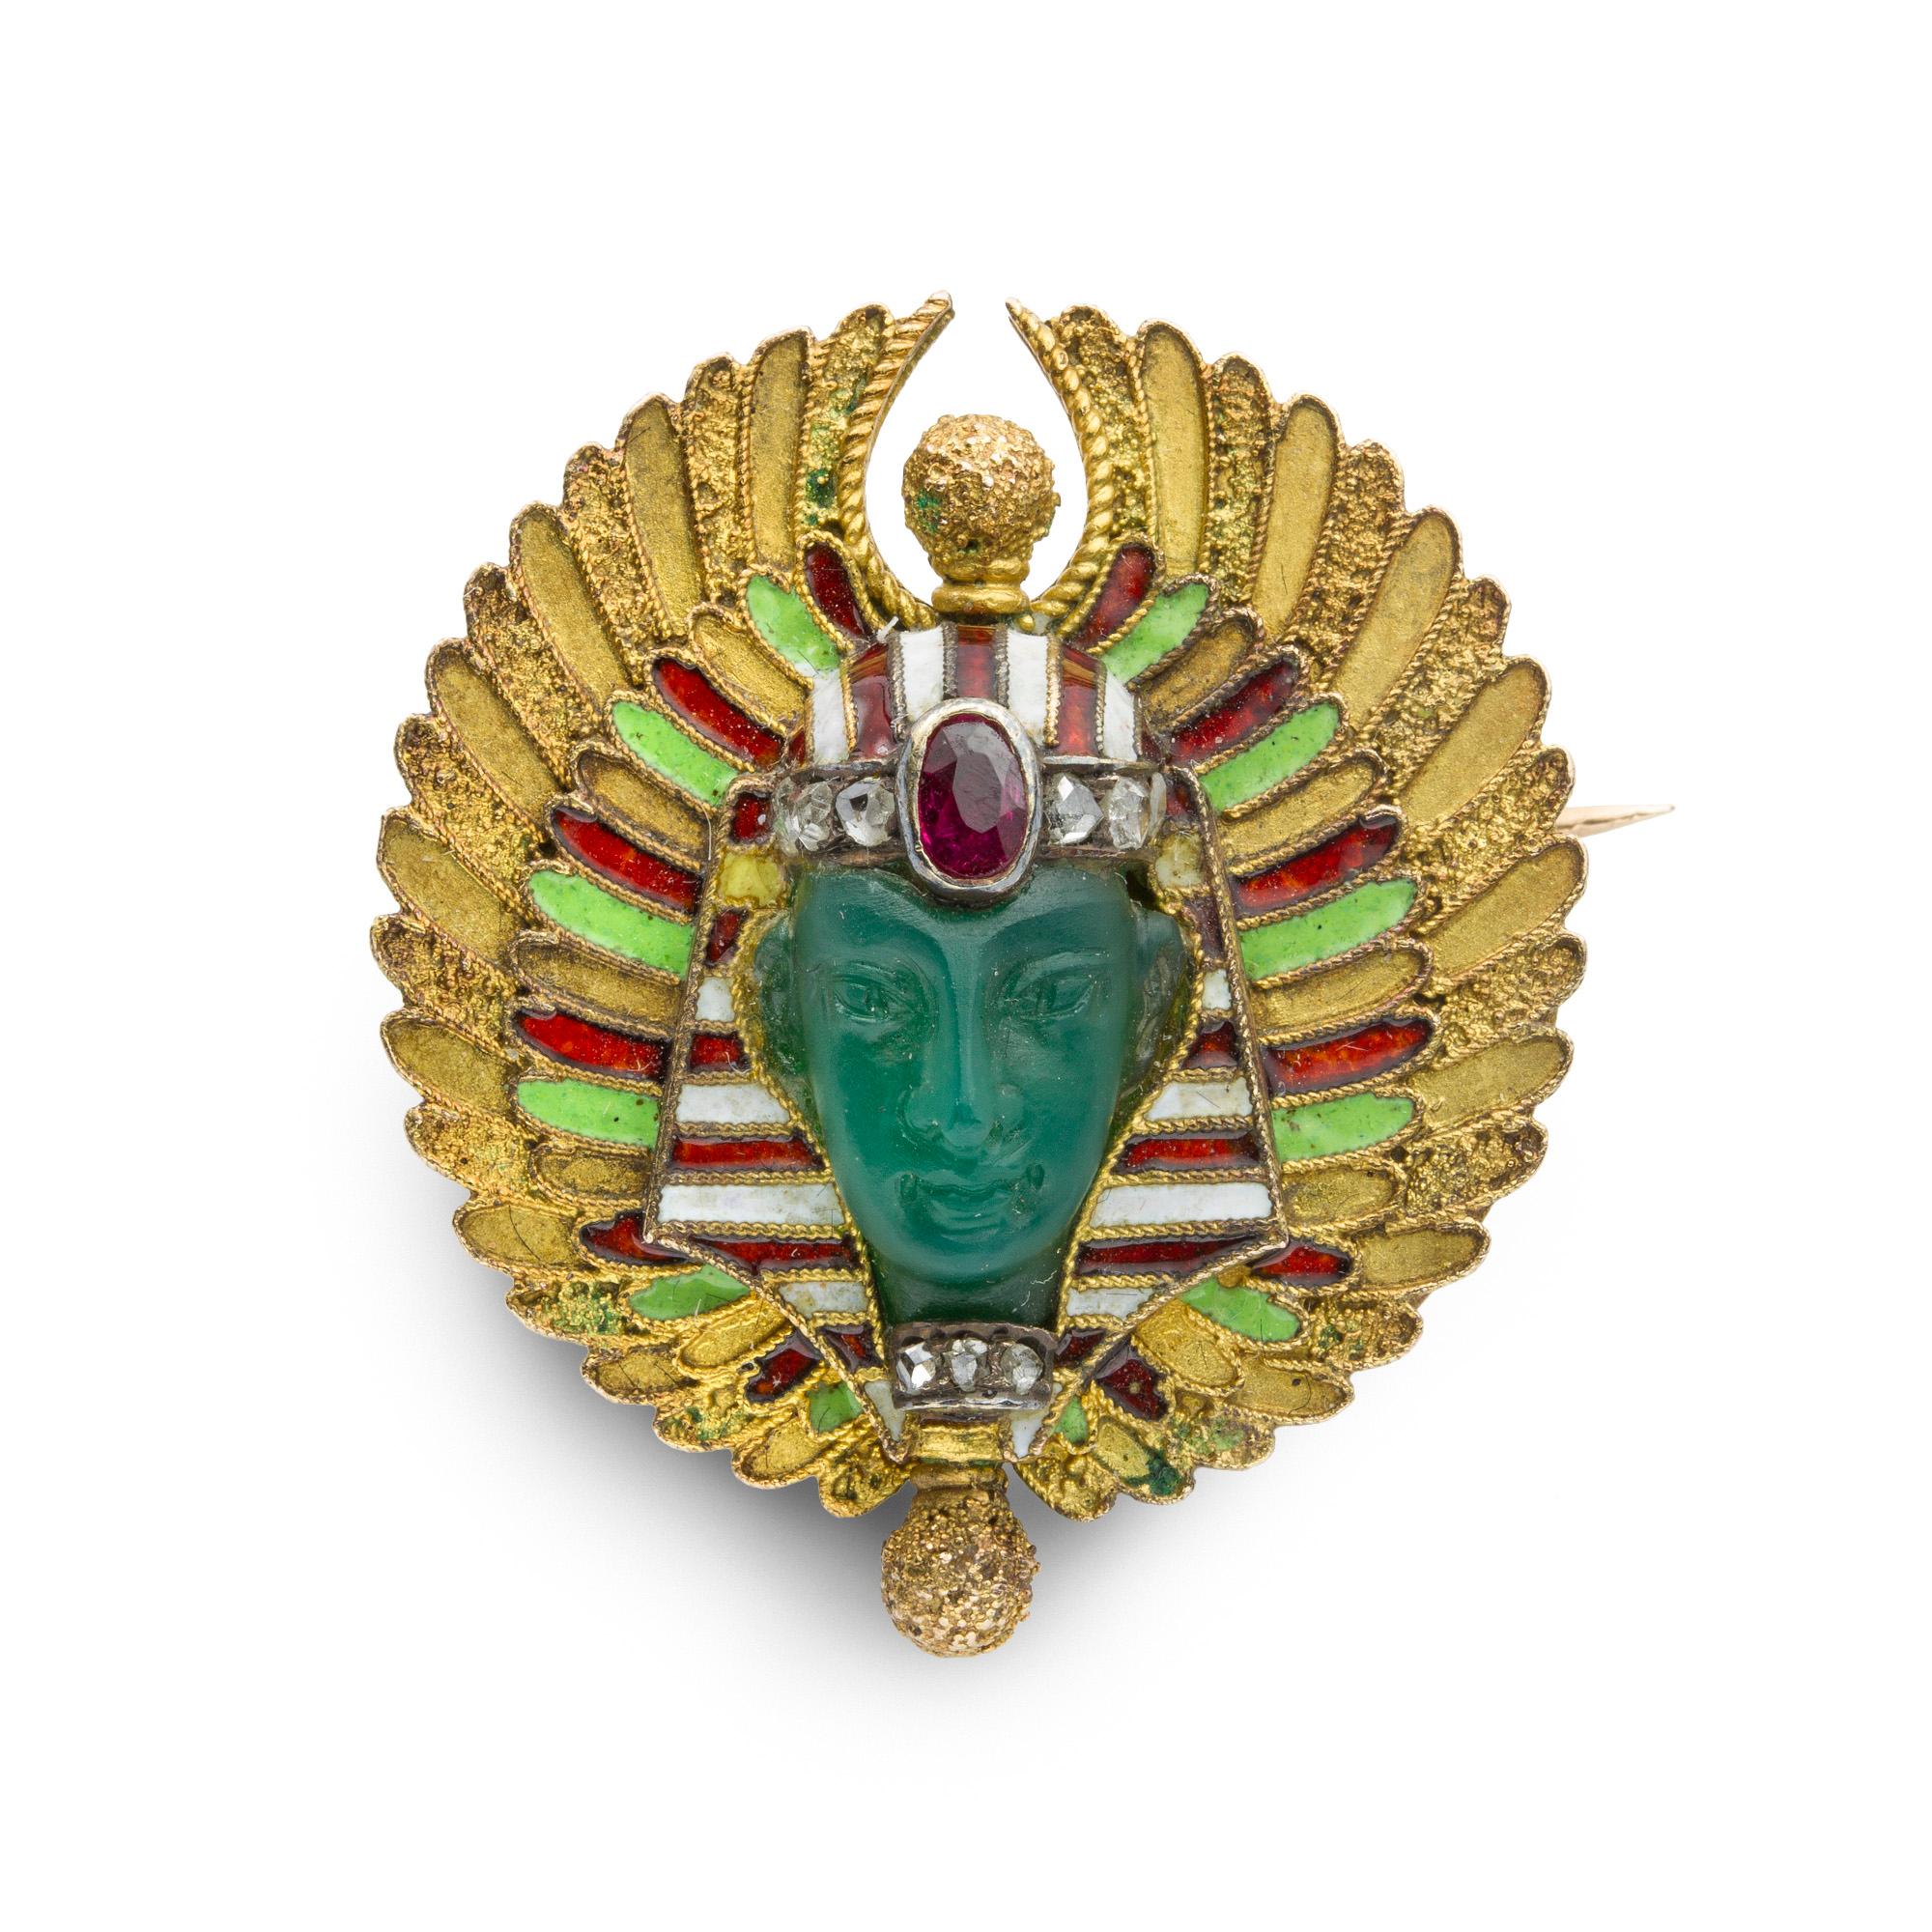 An 19th century Egyptian revival Pharaoh brooch, the chalcedony realistically carved as the face of the Pharaoh in a millegraine setting, wearing an oval faceted ruby and rose-cut diamond-set band on his forehead surrounded by a white and red enamel